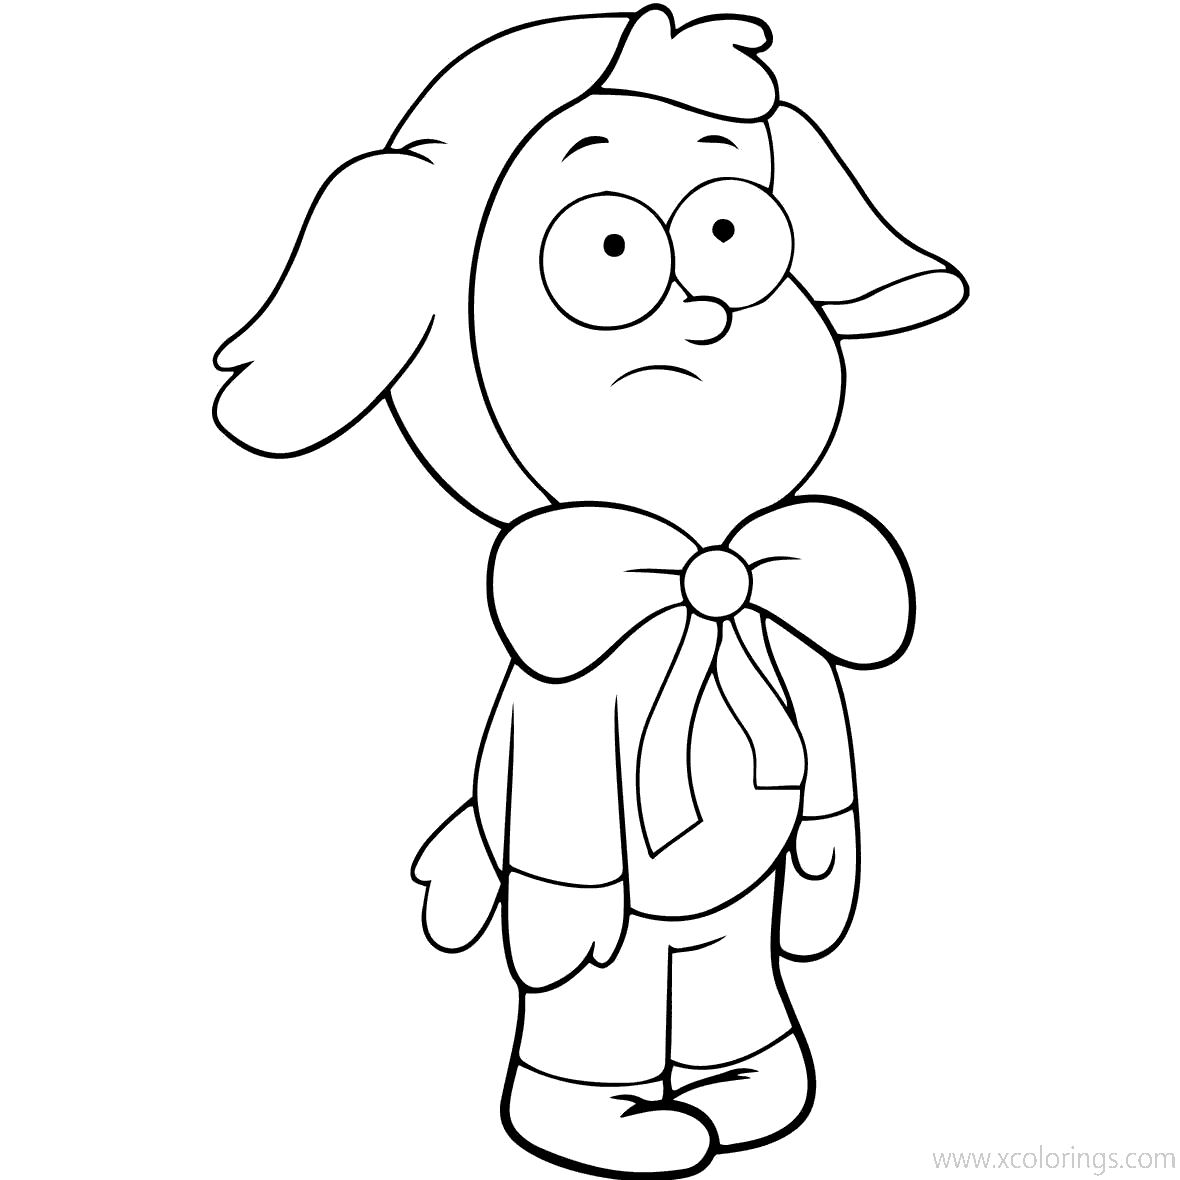 Free Gravity Falls Coloring Pages Funny Dipper printable